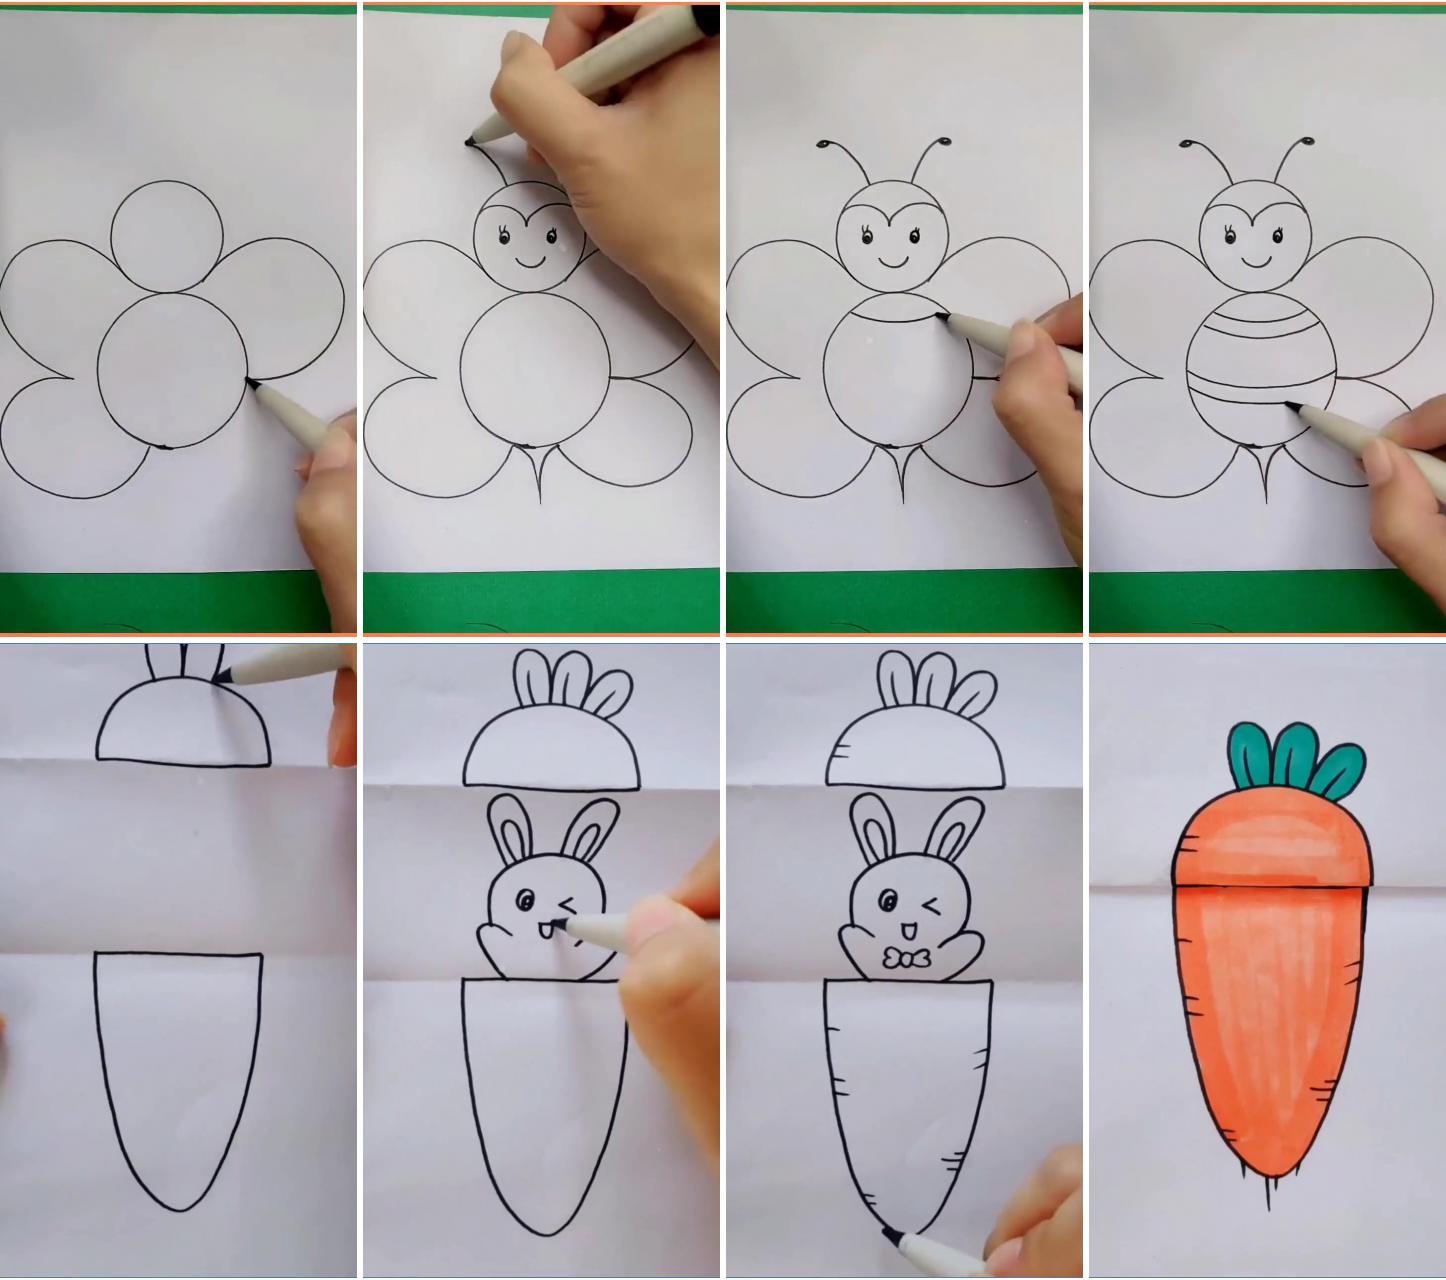 Easy how to draw a honeybee step by step tutorial | easy ways to draw a carrots - learn how to draw a carrots